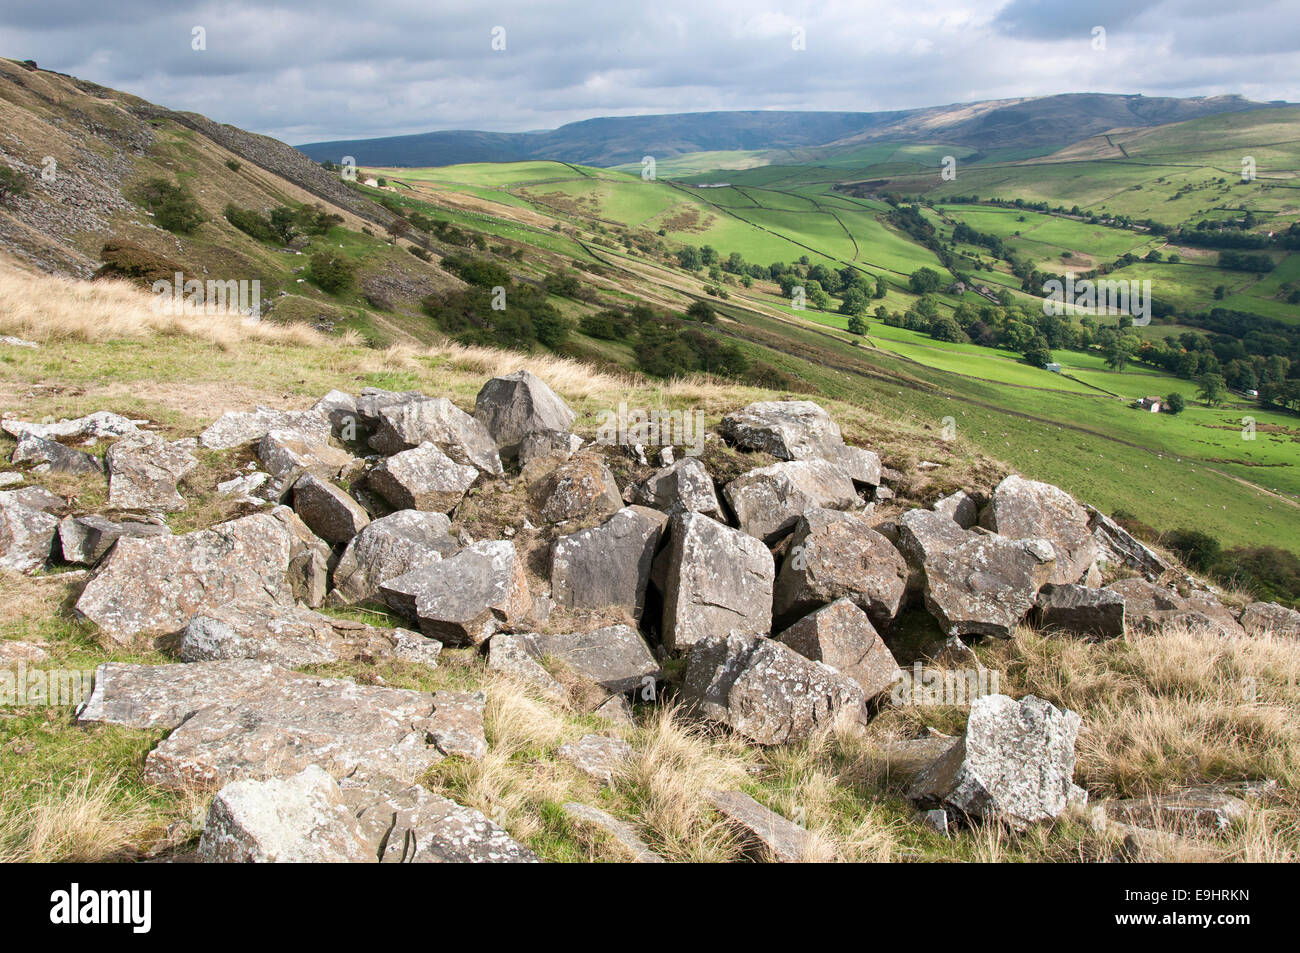 Cracken edge quarries near Chinley in Derbyshire. Gritstone rocks in foreground, view toward Kinder Scout. Stock Photo